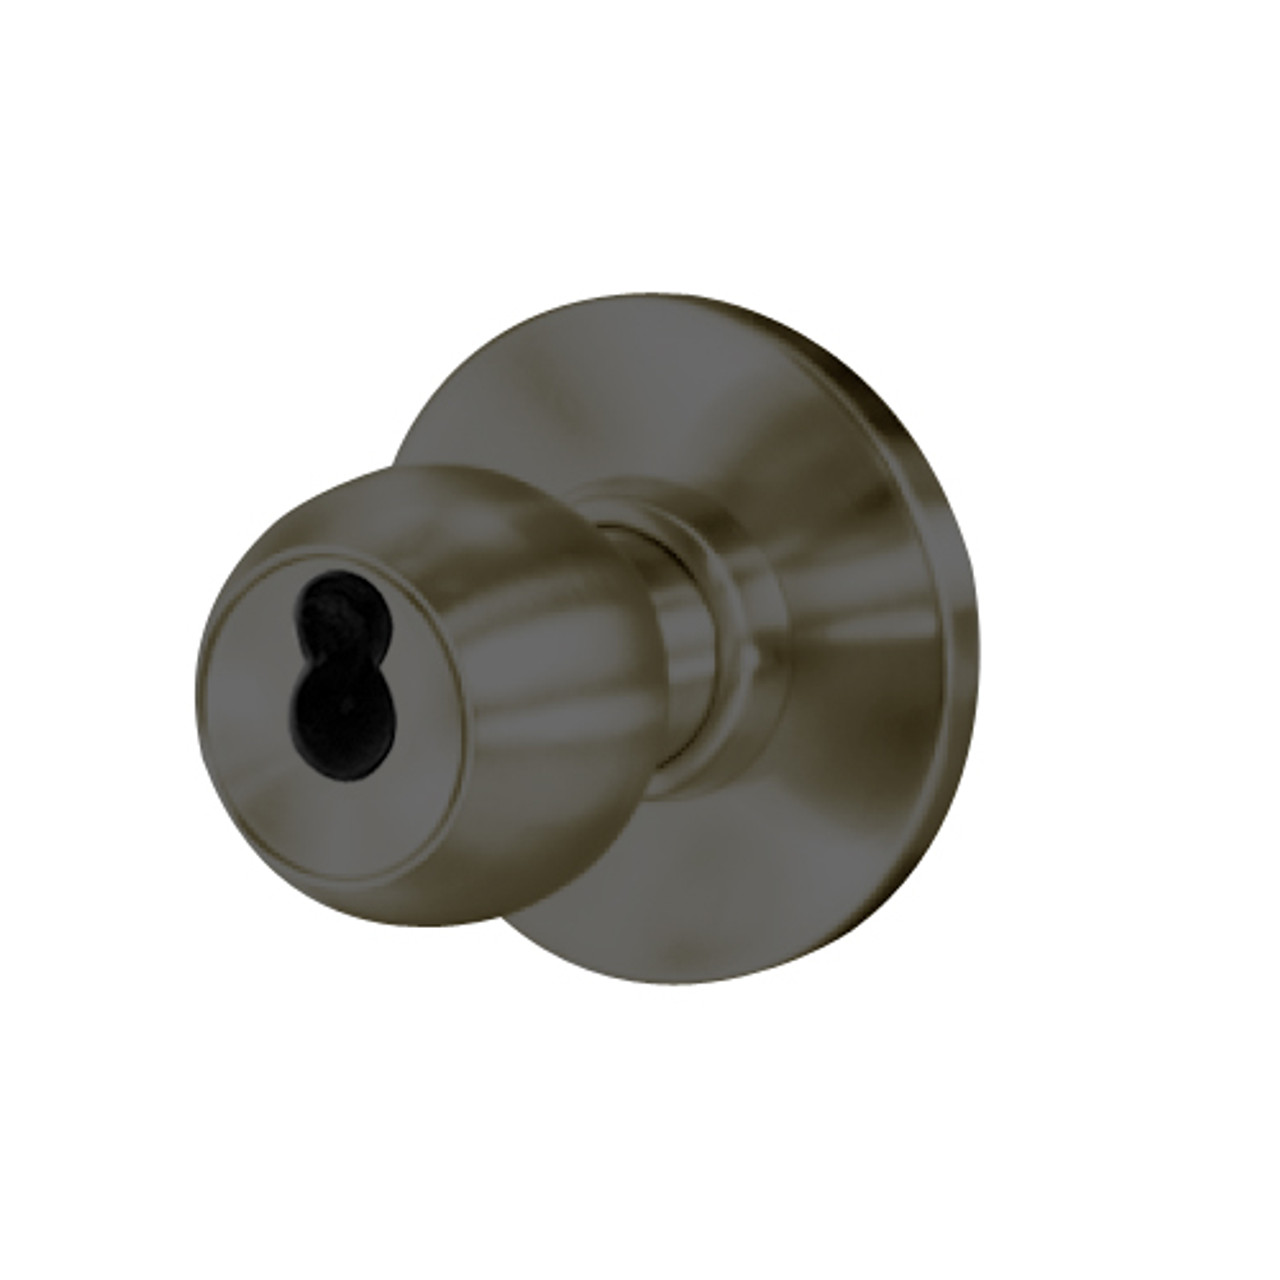 8K37YR4ASTK613 Best 8K Series Exit Heavy Duty Cylindrical Knob Locks with Round Style in Oil Rubbed Bronze